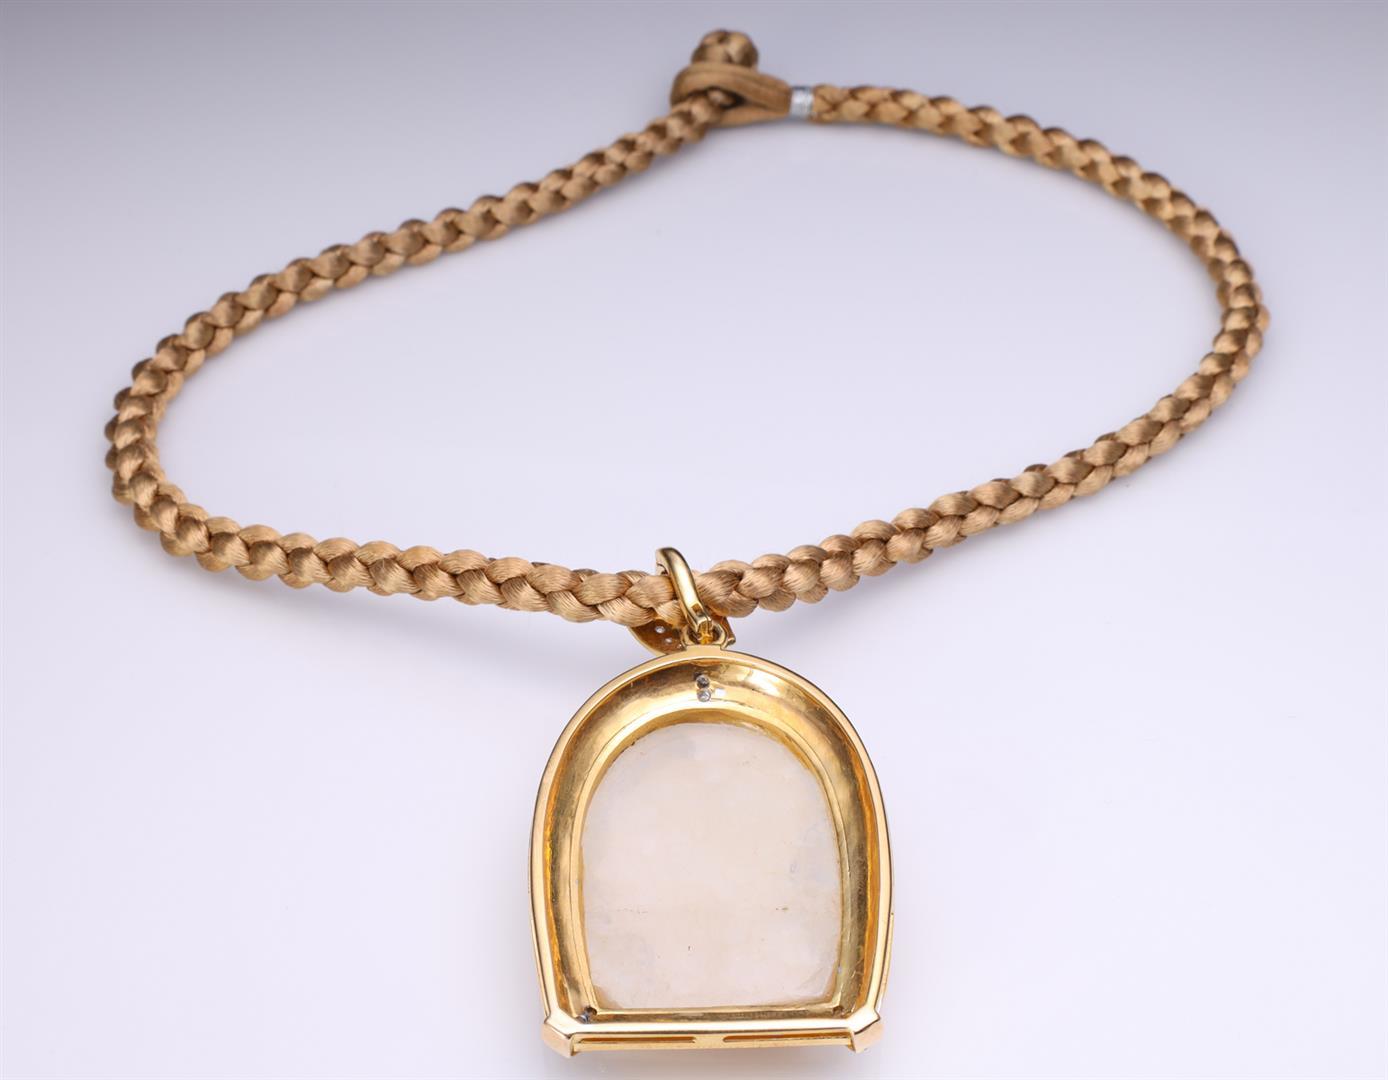 Antique Carved Cameo Agate in Later 18K Yellow Gold and Diamond Mount